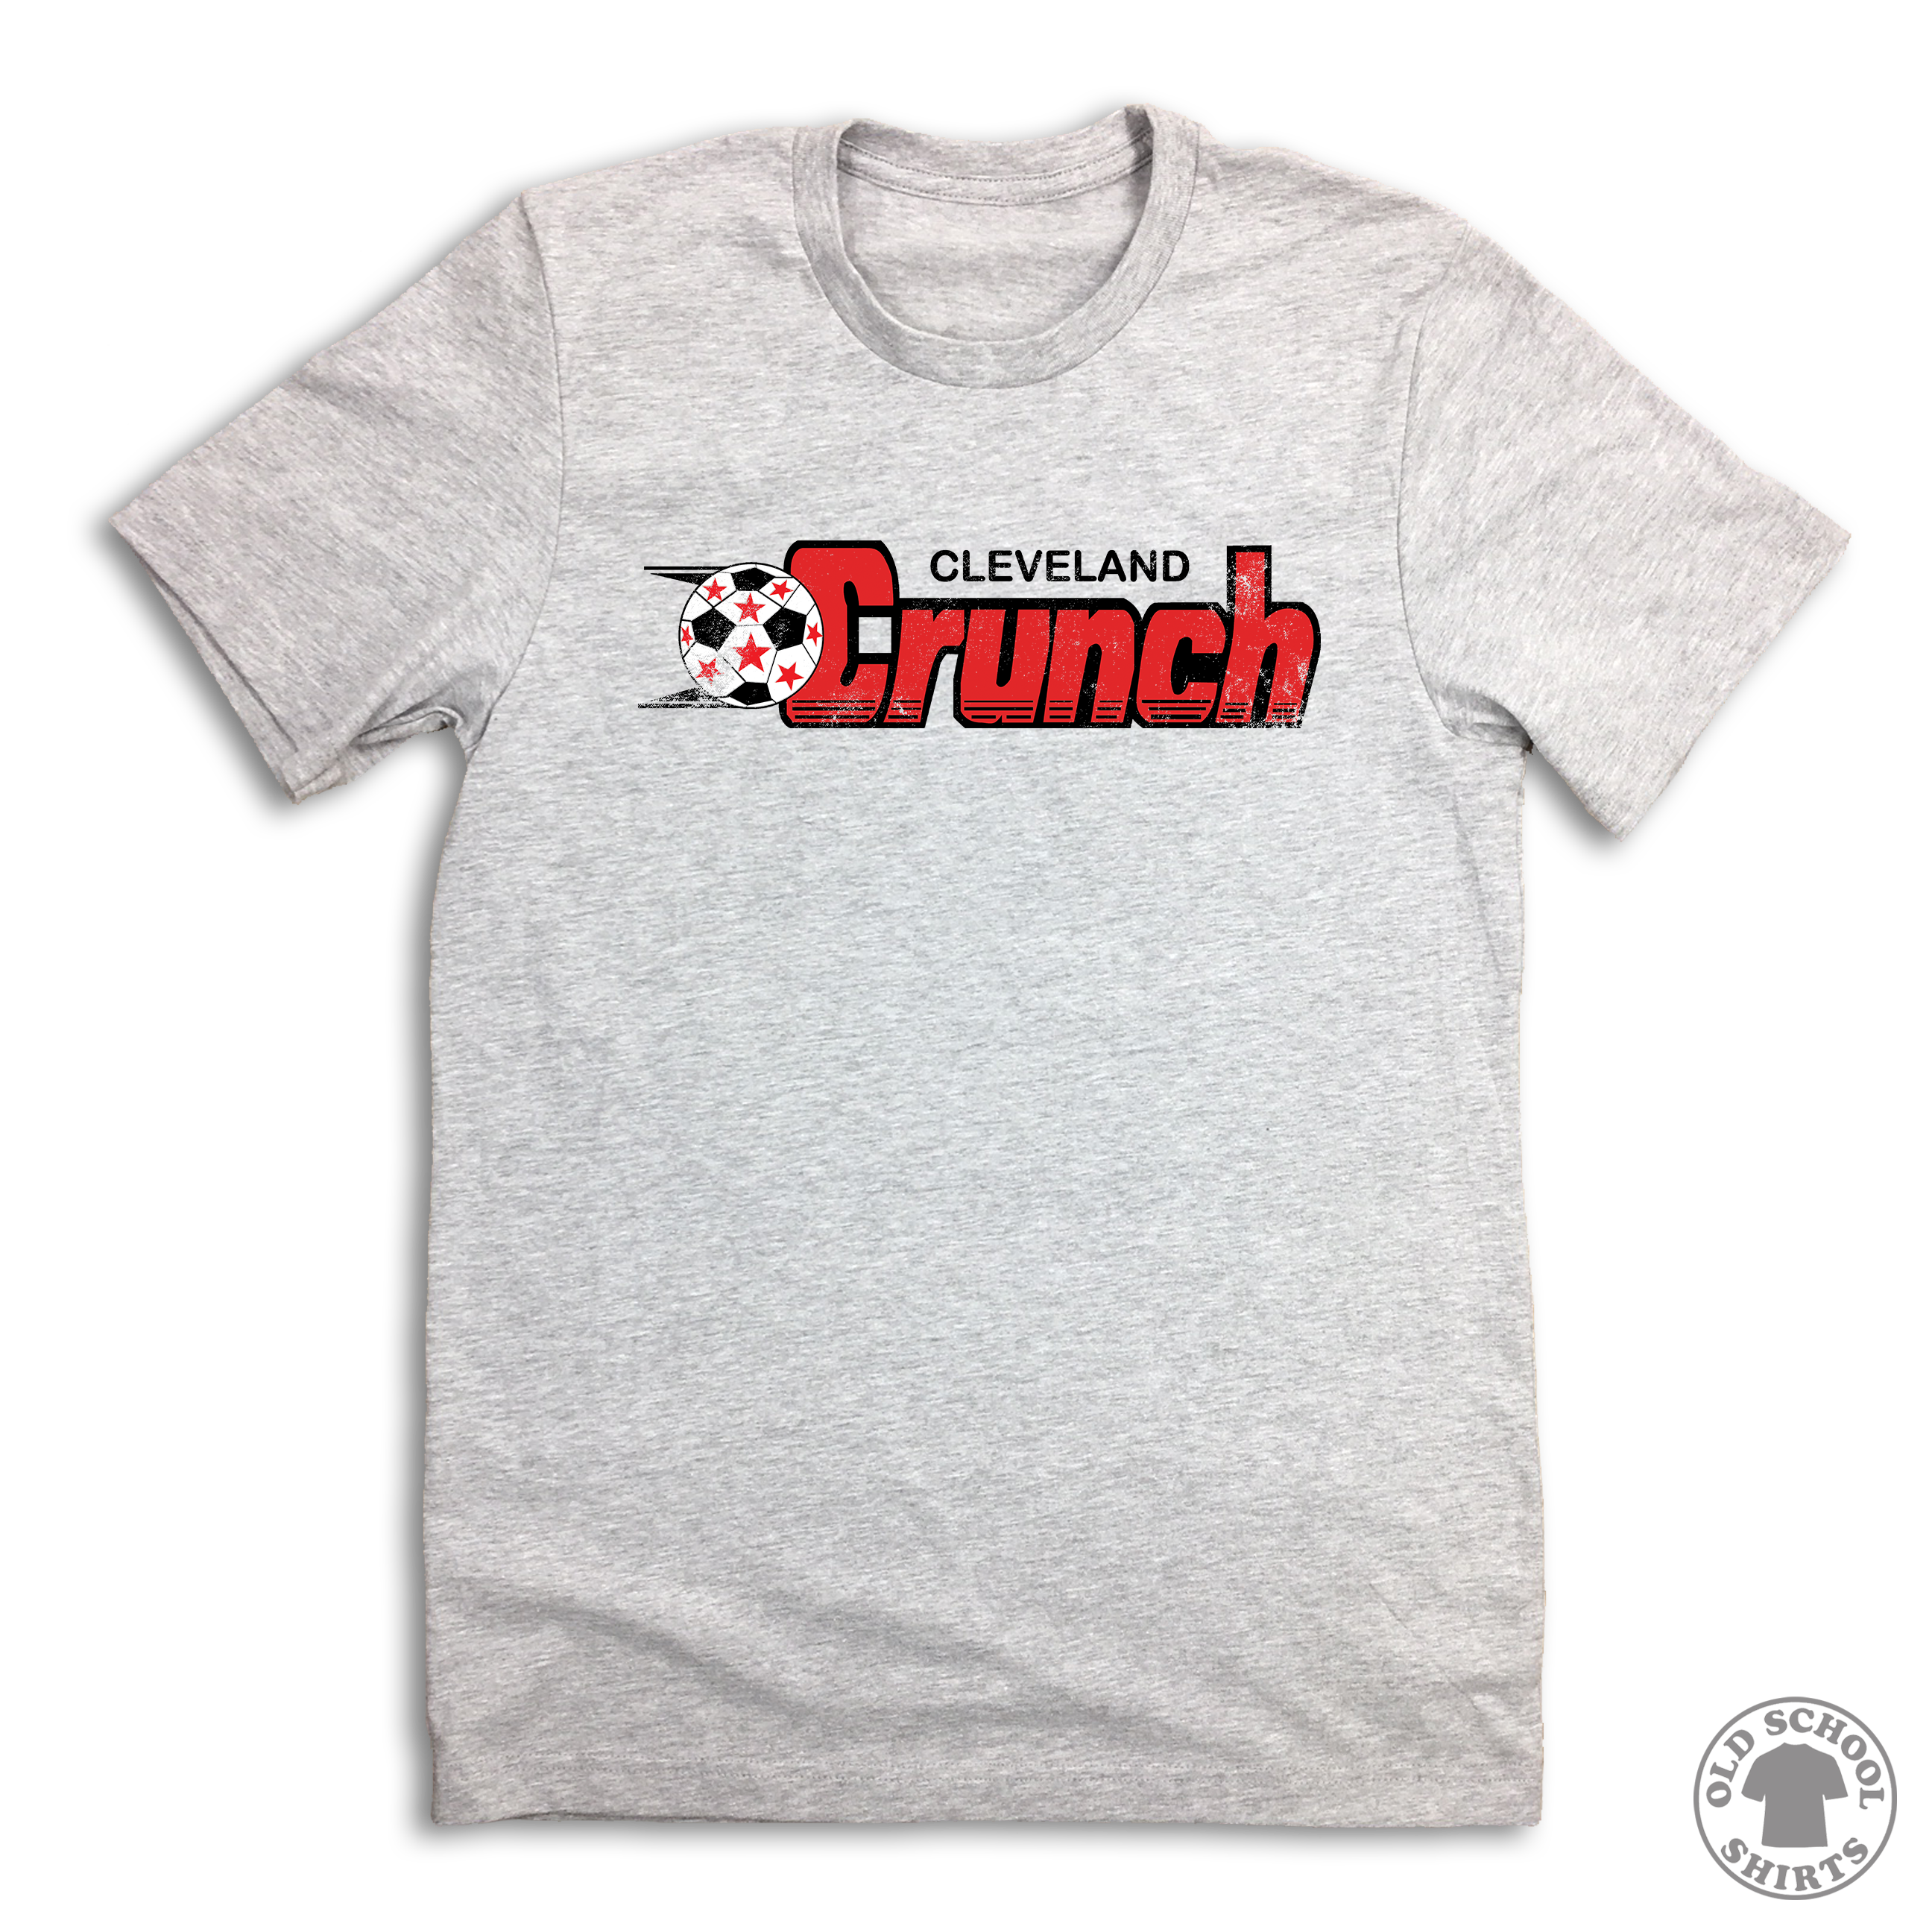 Cleveland Crunch Indoor Soccer - Old School Shirts- Retro Sports T Shirts